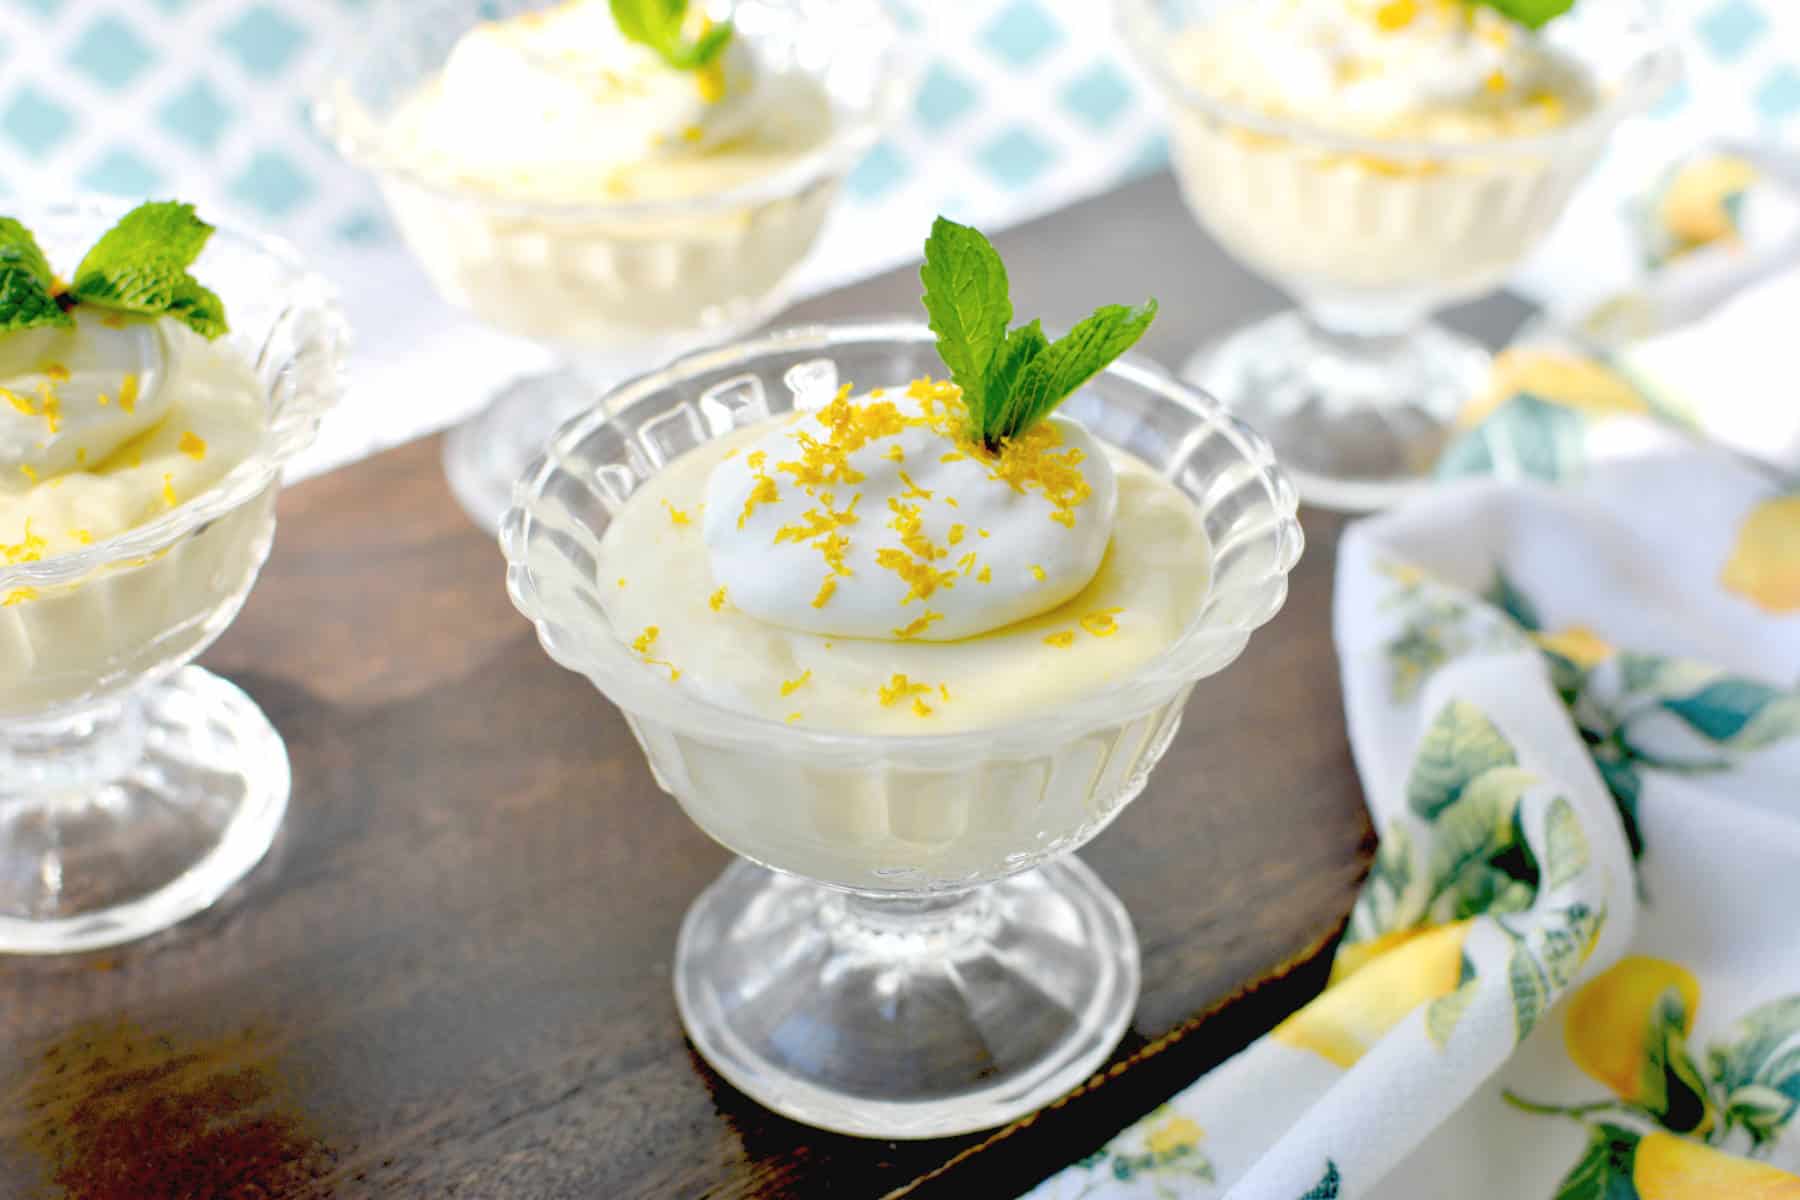 homemade lemon pudding in cups topped with whipped cream, lemon zest and mint leaves.